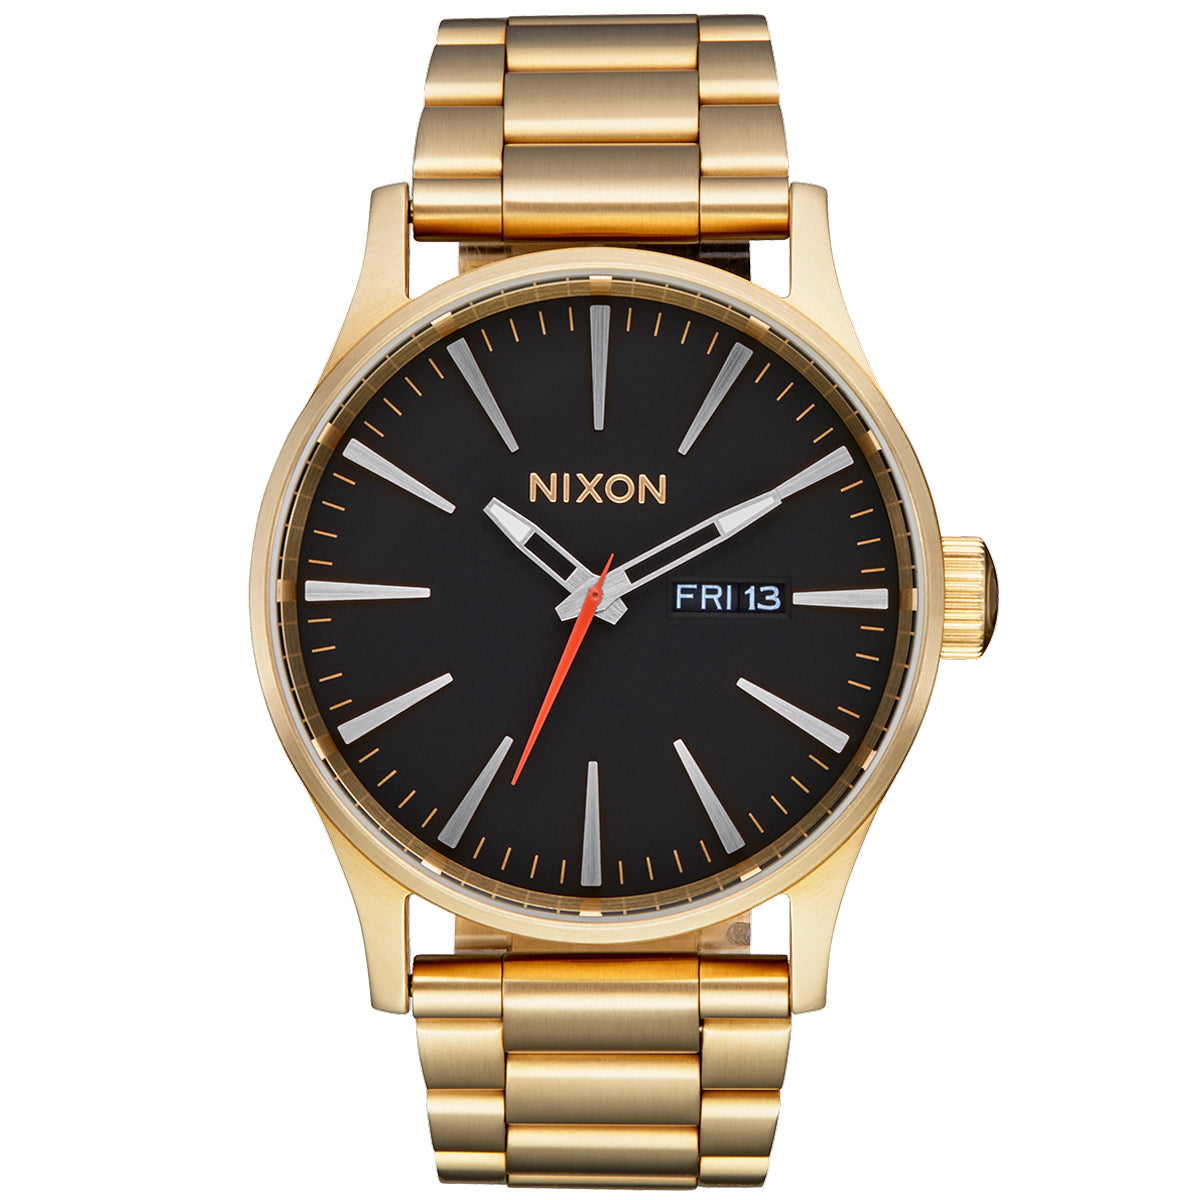 Nixon Sentry Stainless Steel Watch - Champagne/Black image 1